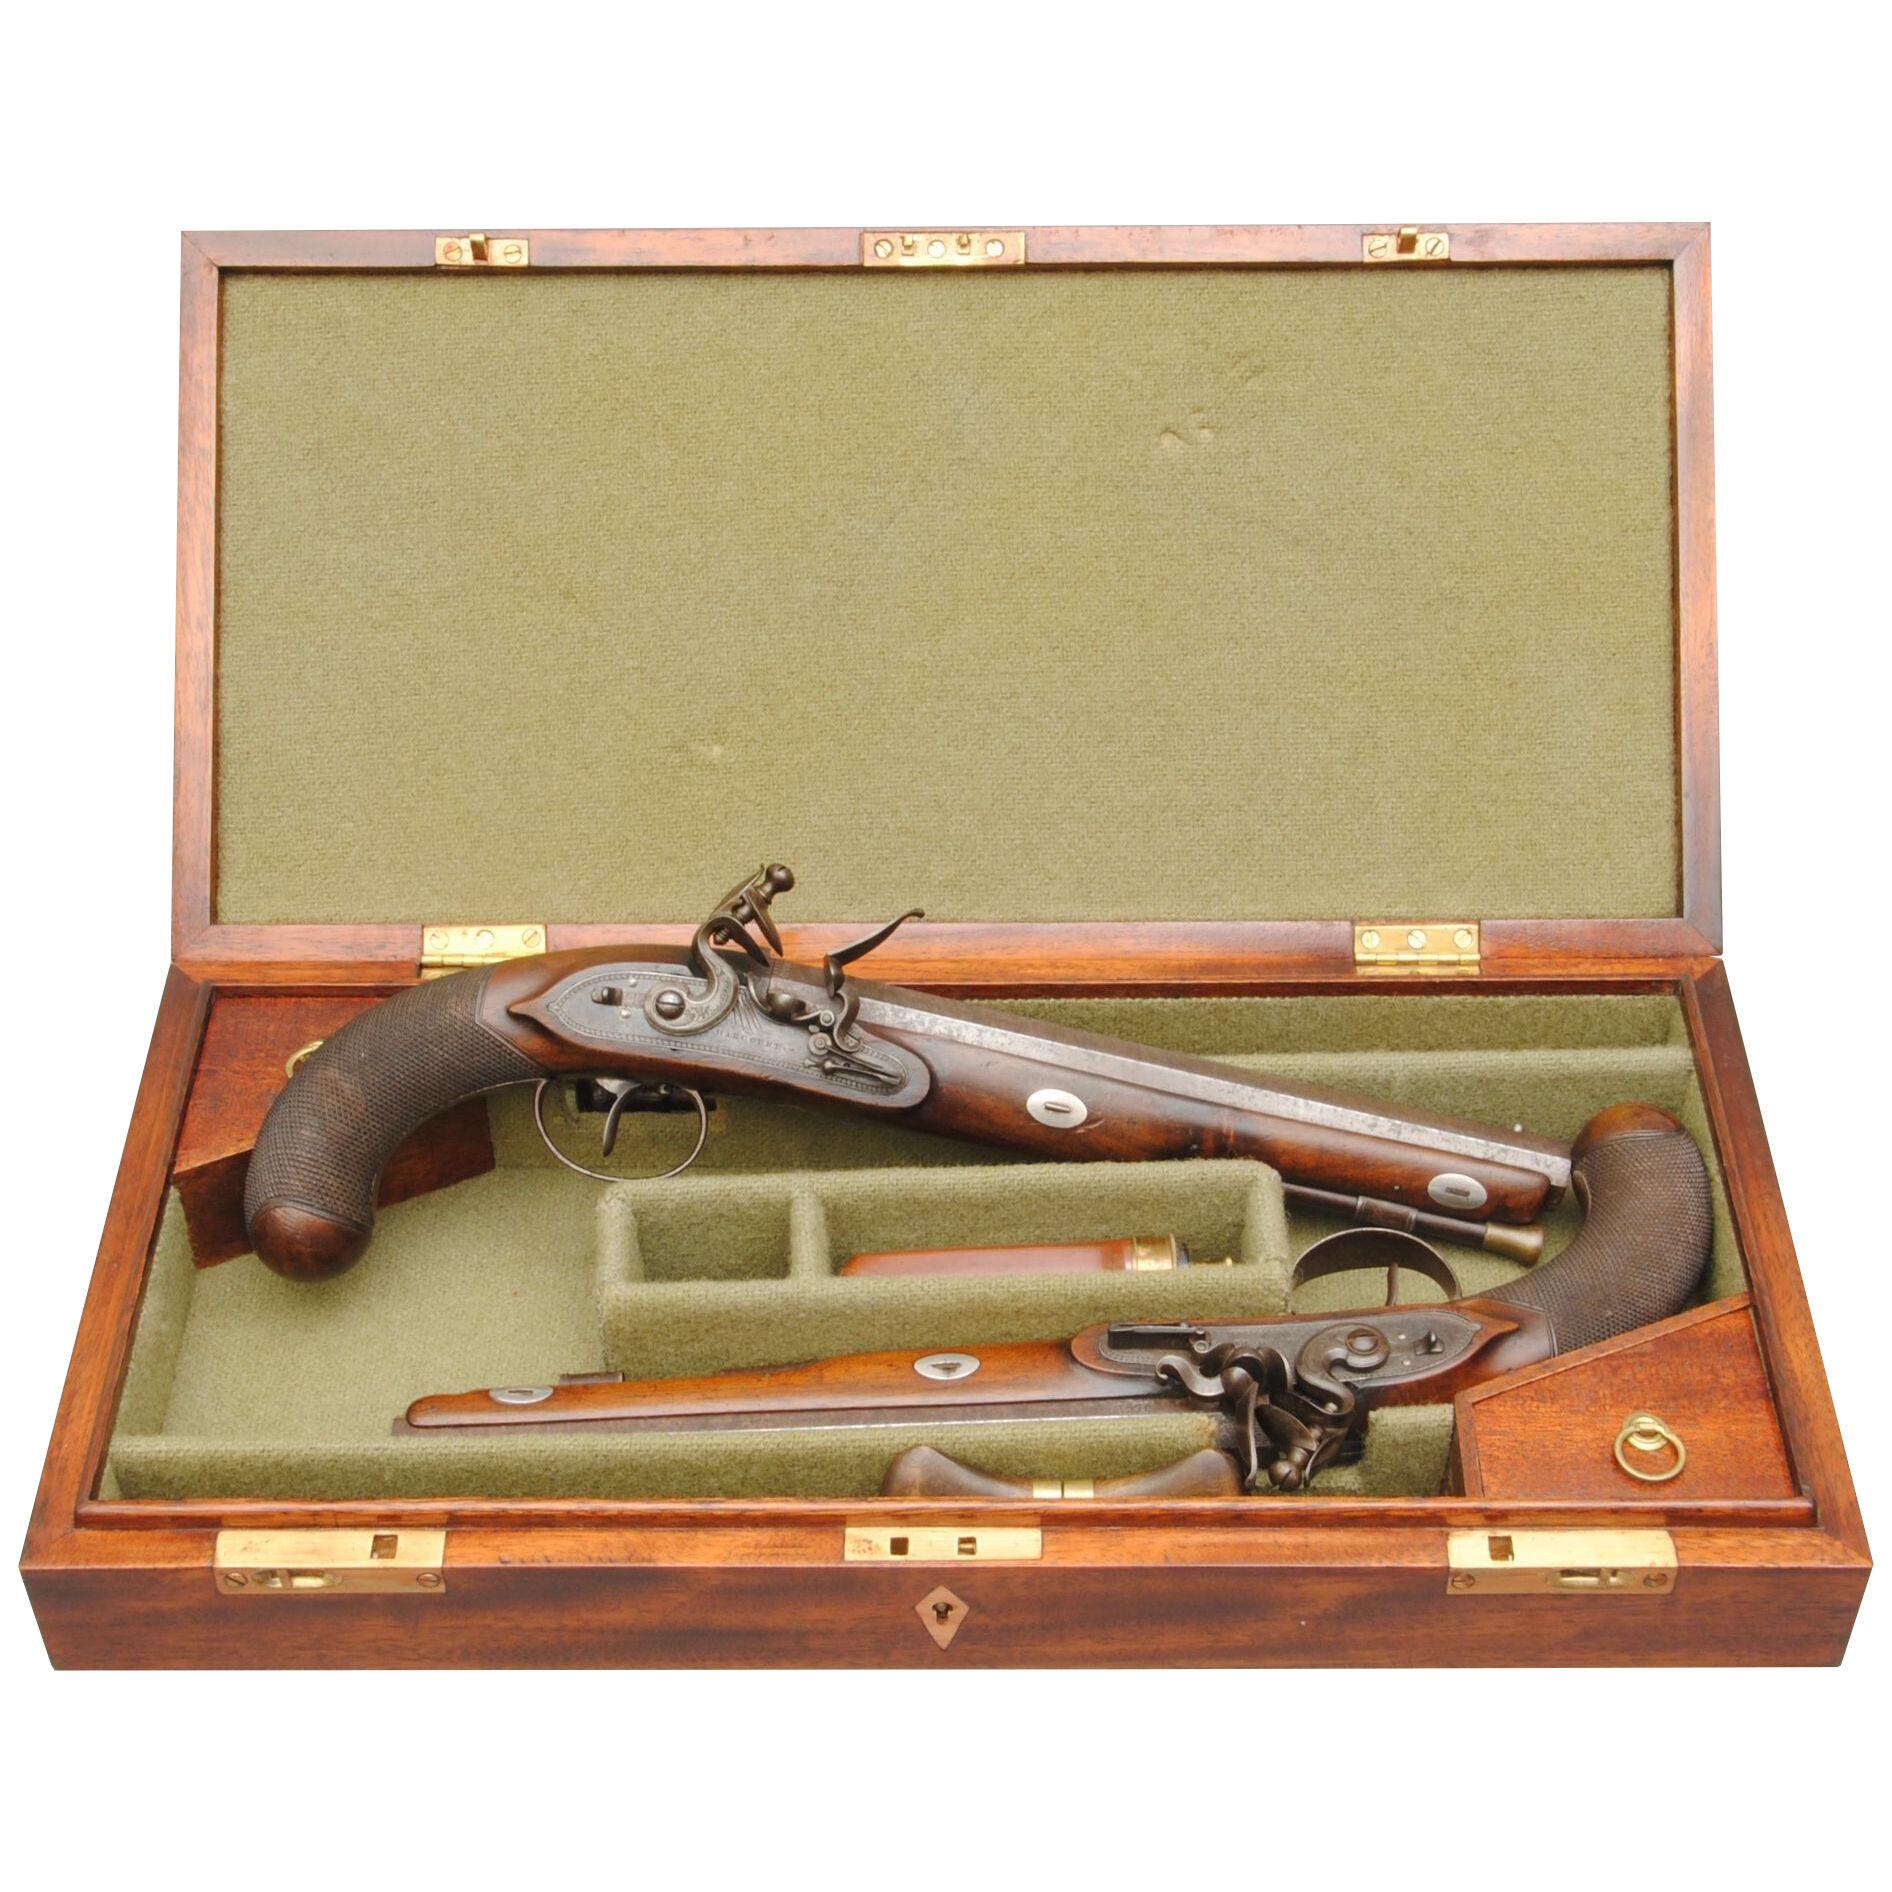 A PAIR OF FLINTLOCK DUELING PISTOLS BY HARCOURT OF IPSWICH